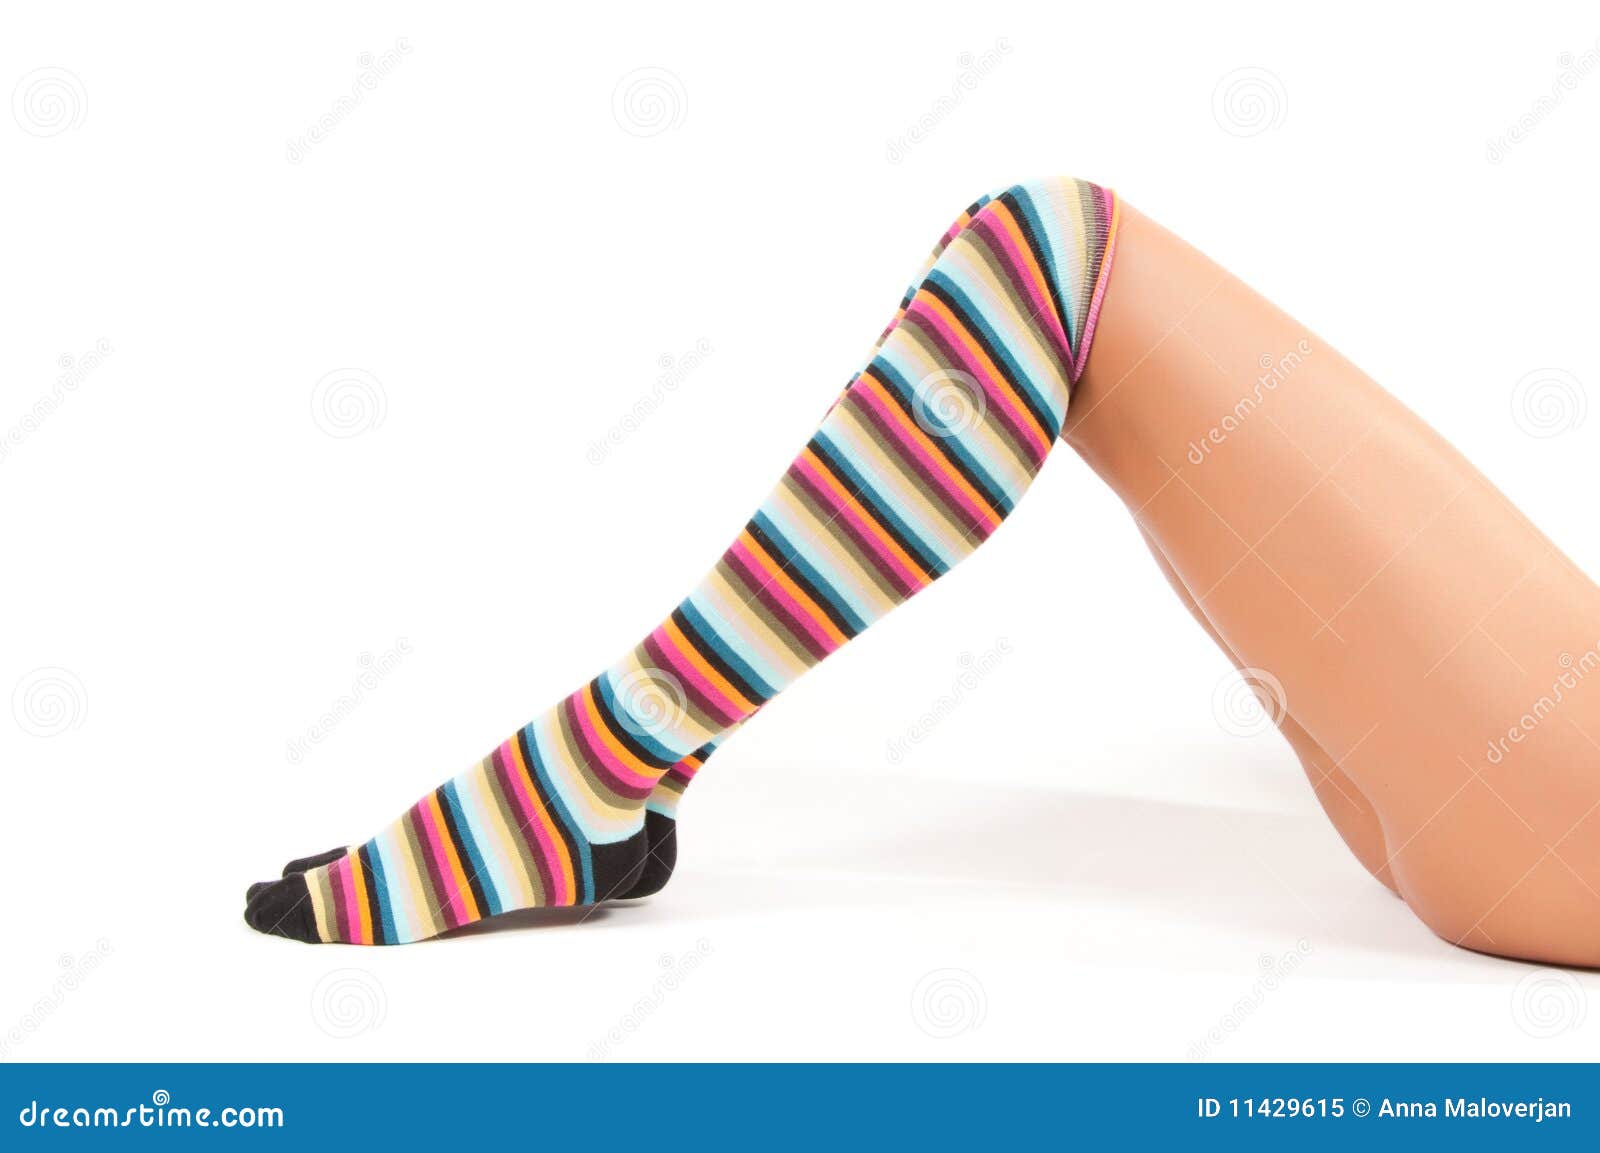 Shot of woman legs in multicolored stockings sitting onthe floor